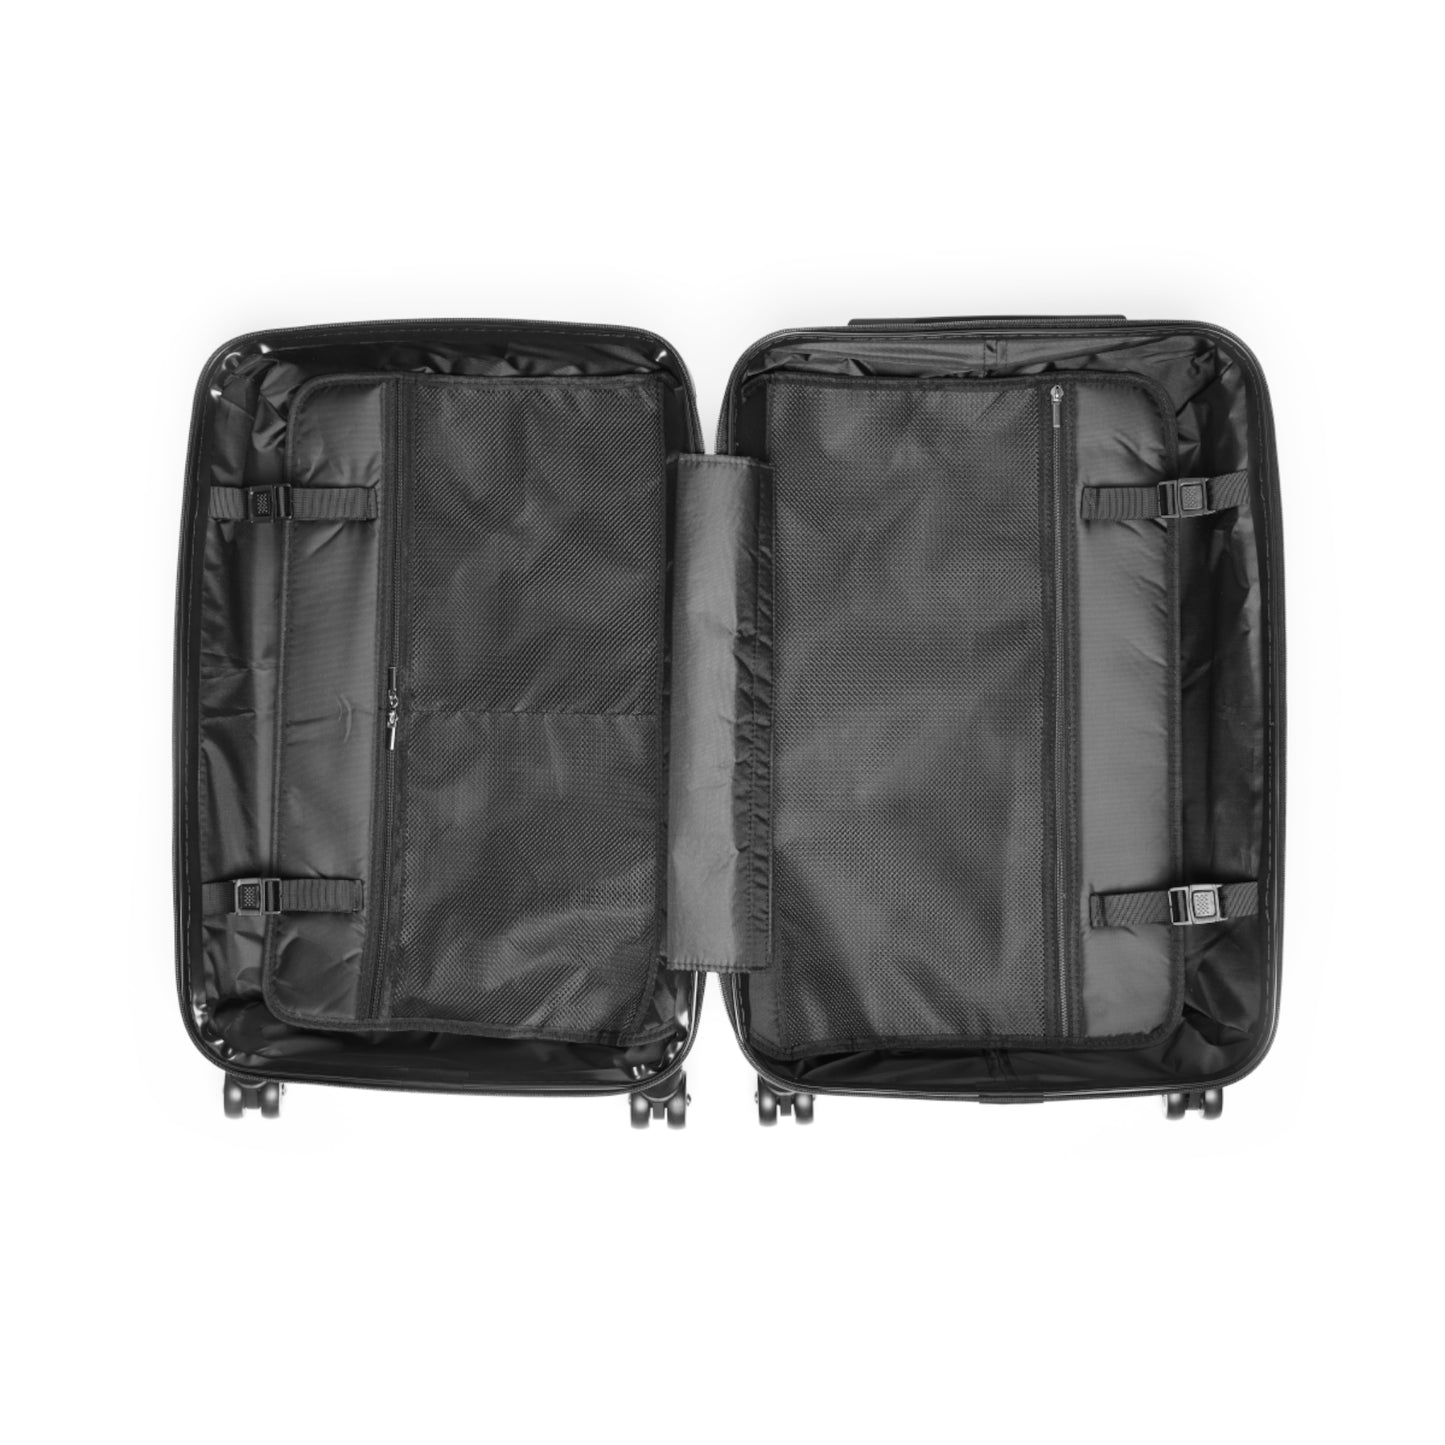 "Sunny Day" Carry on Suitcase (three sizes)